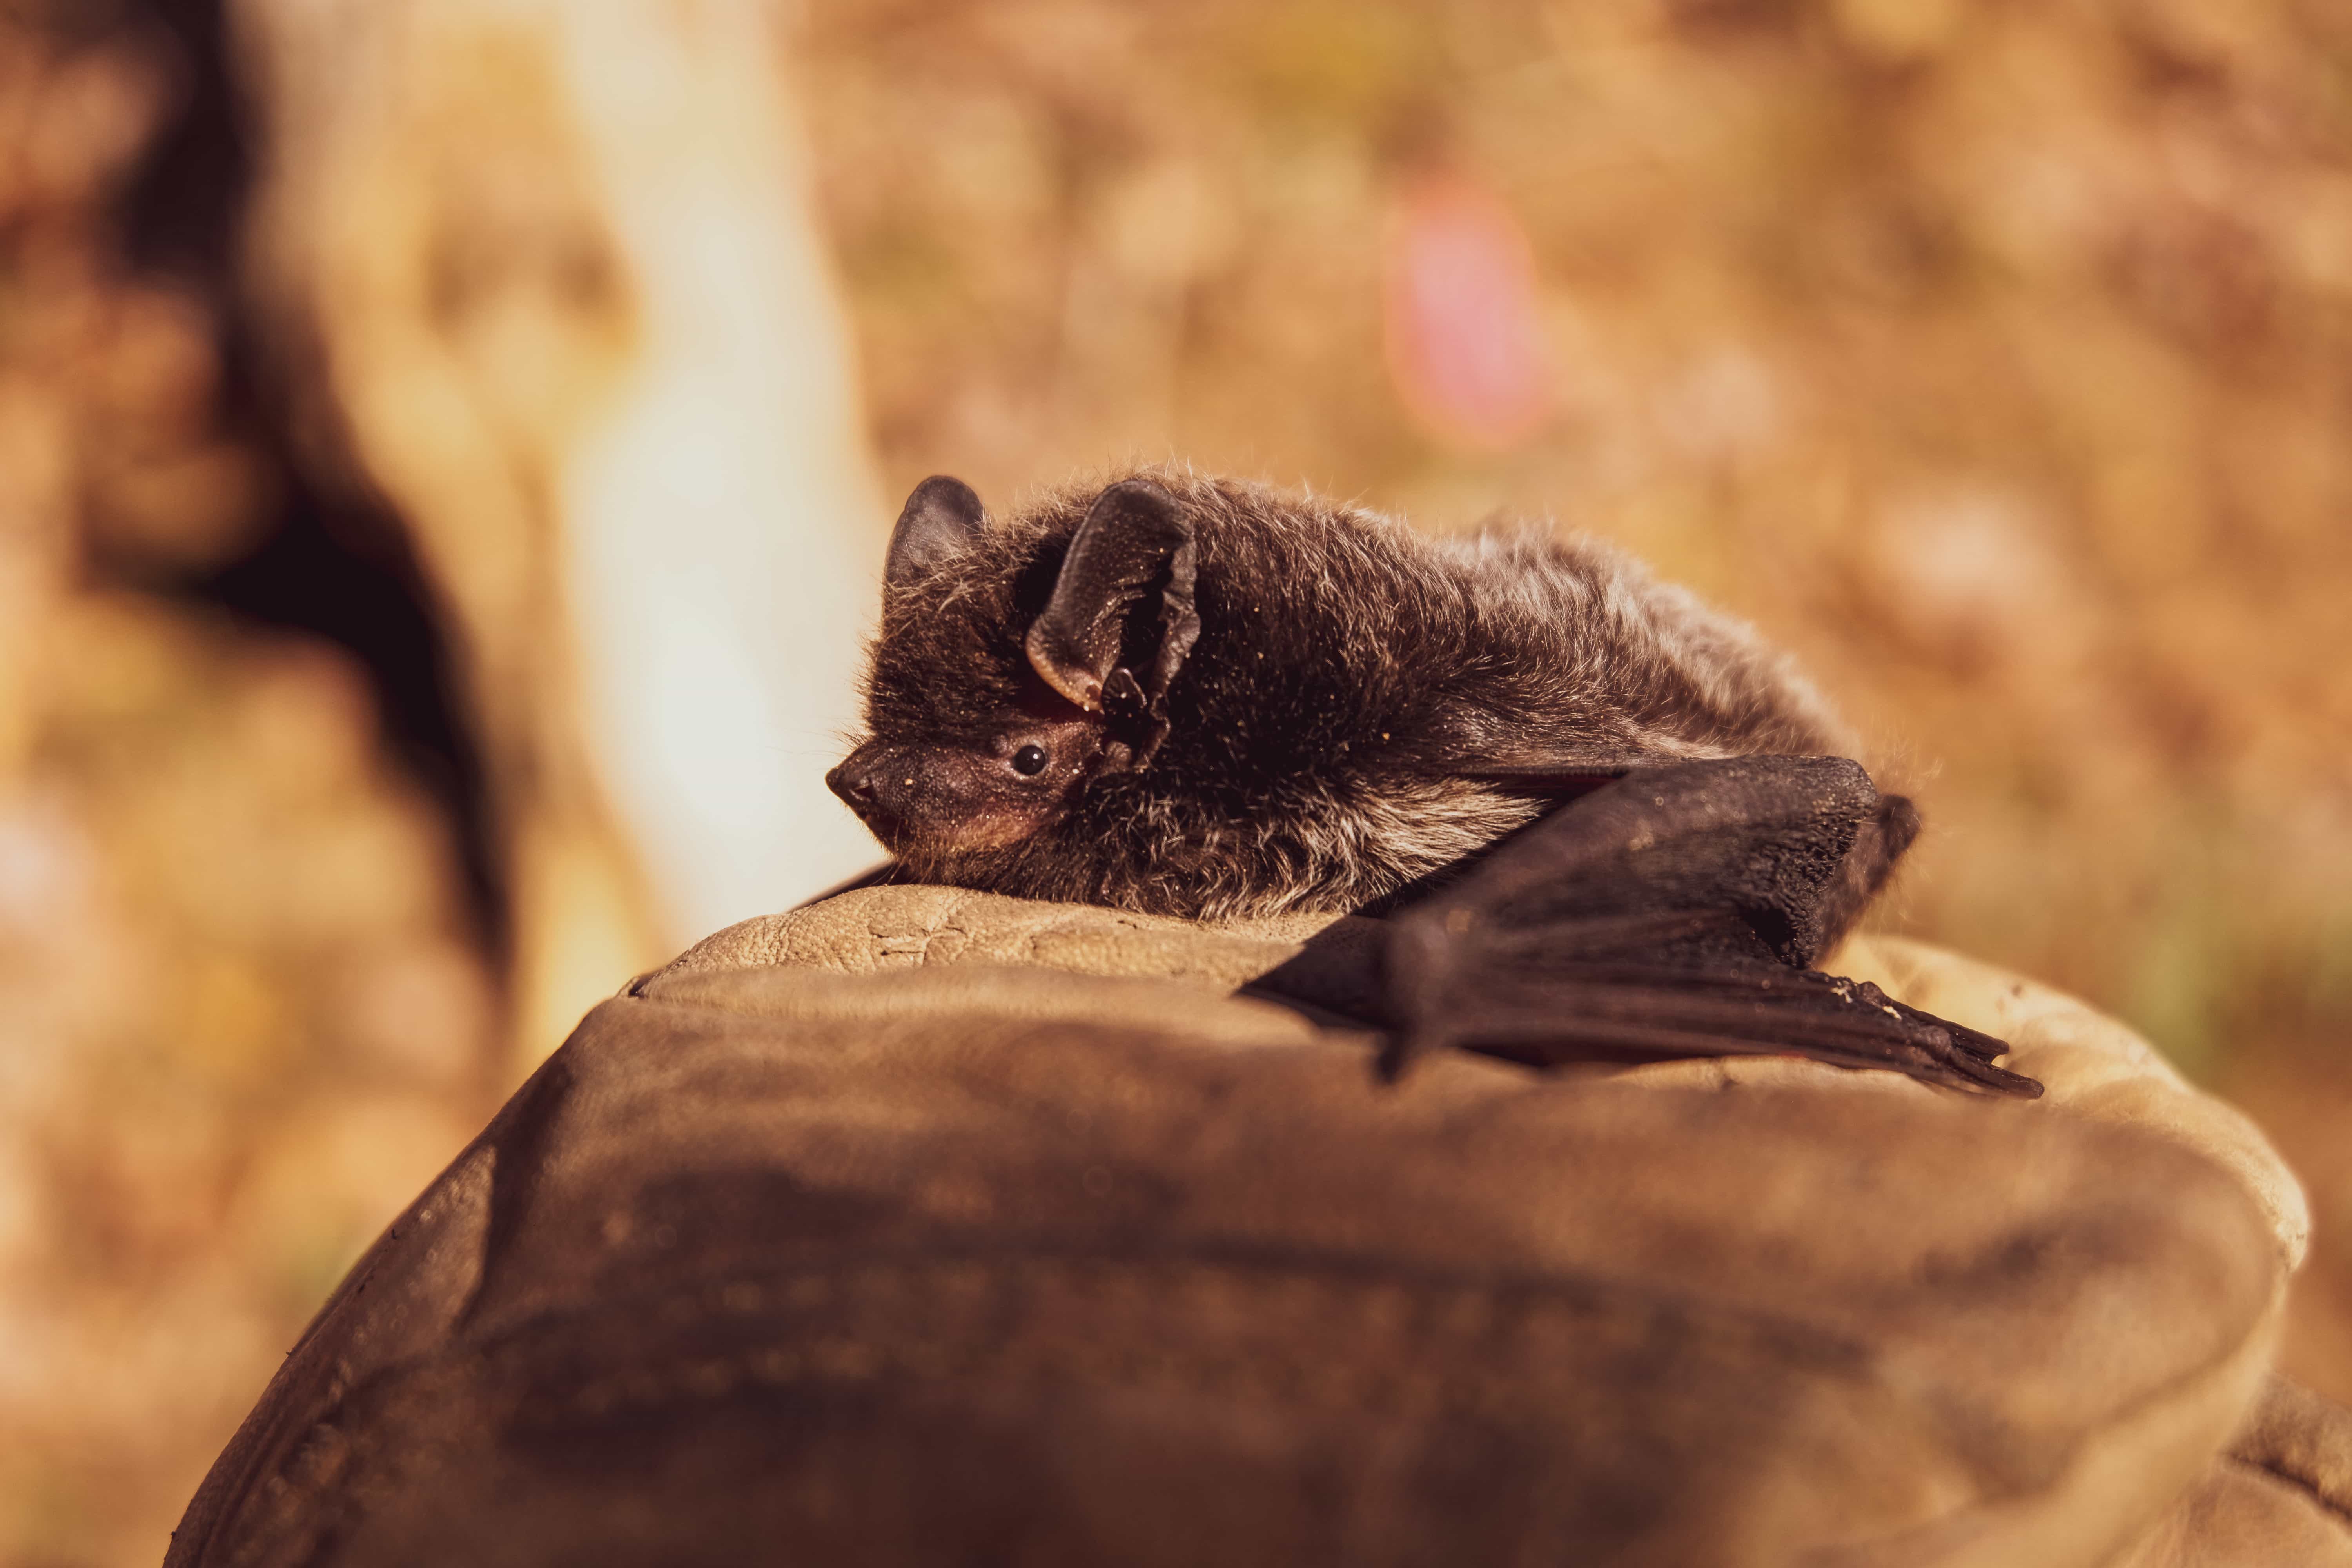 Why do bats have such a bad reputation? :: Understanding Animal Research